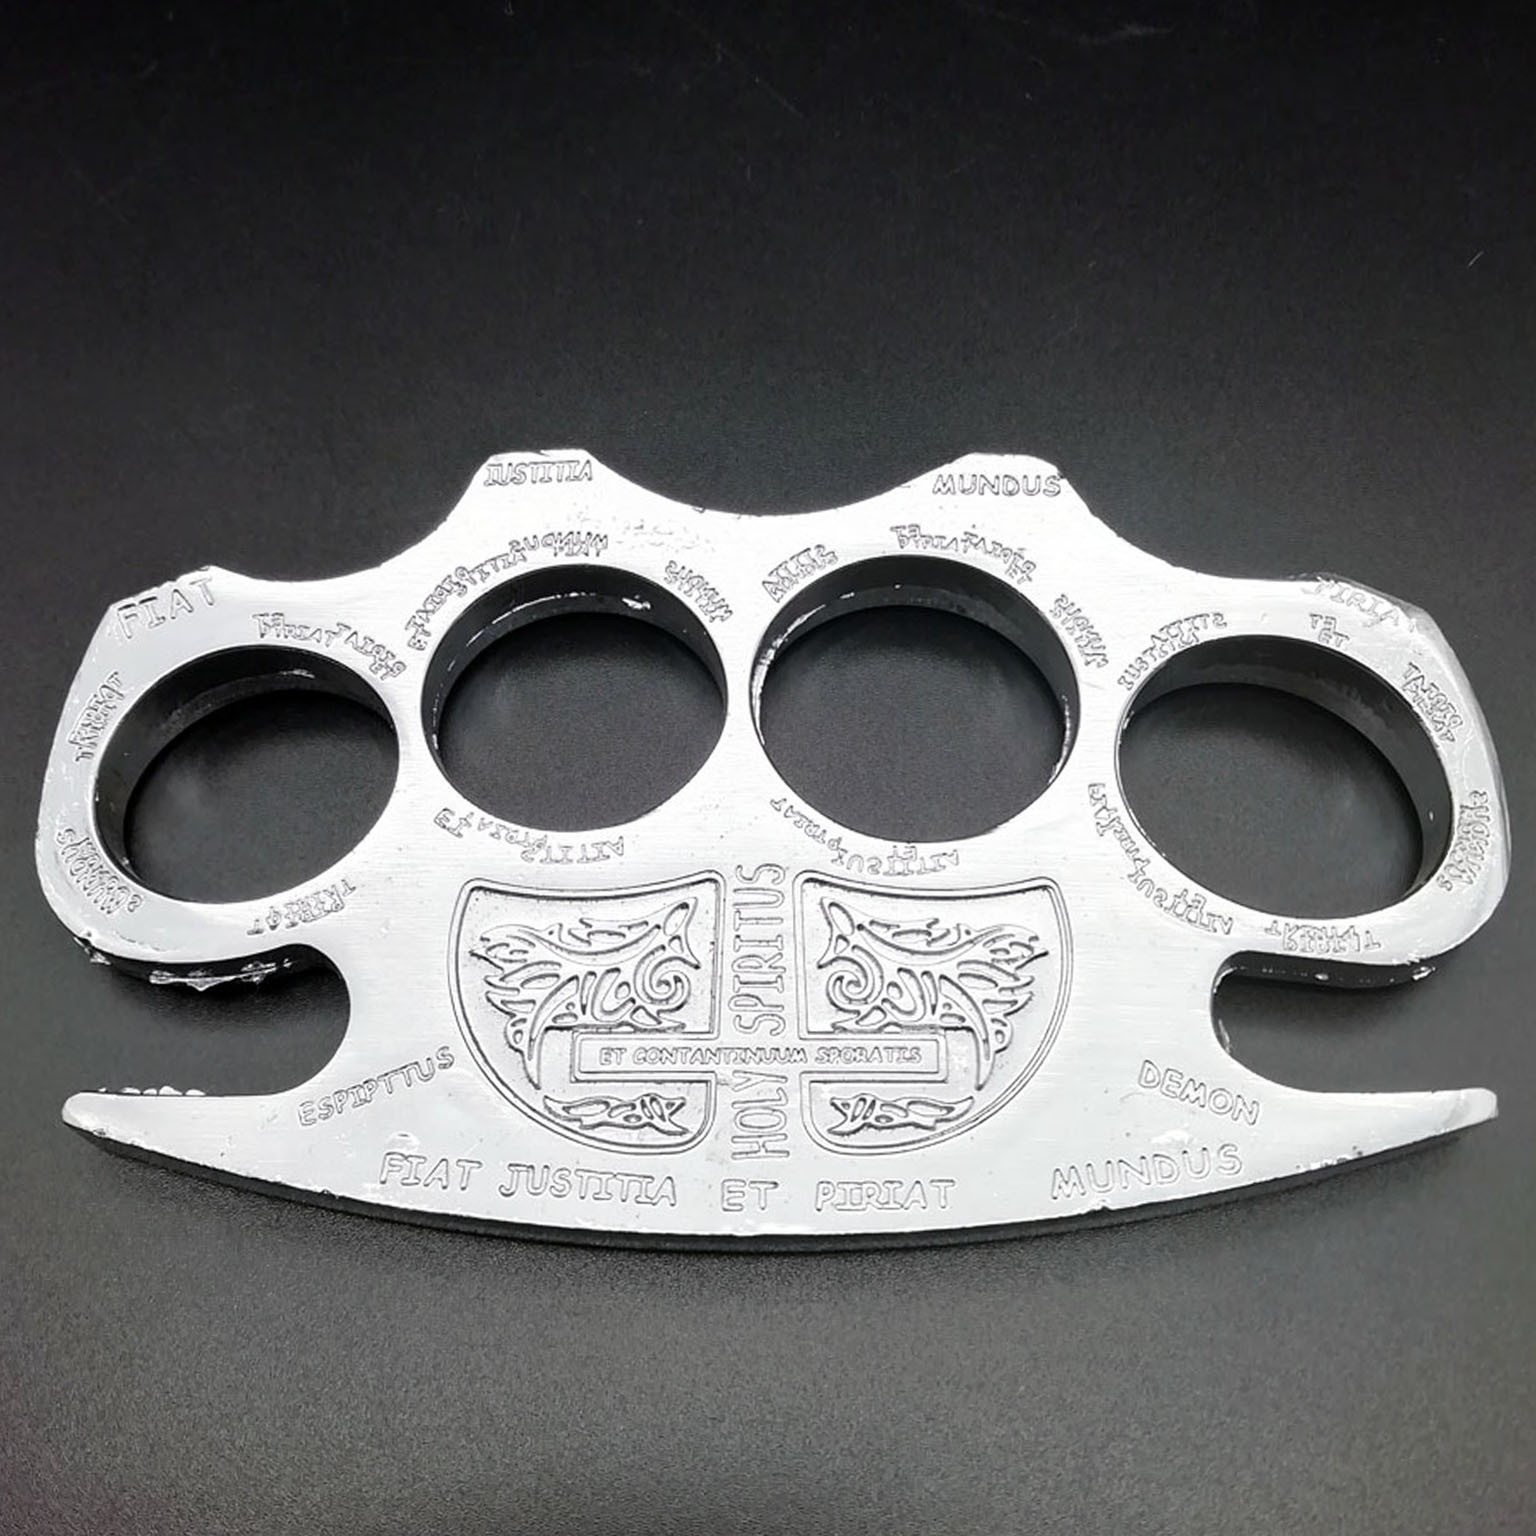 Best Brass Knuckles in the World - Deadly Venom Knuckles 